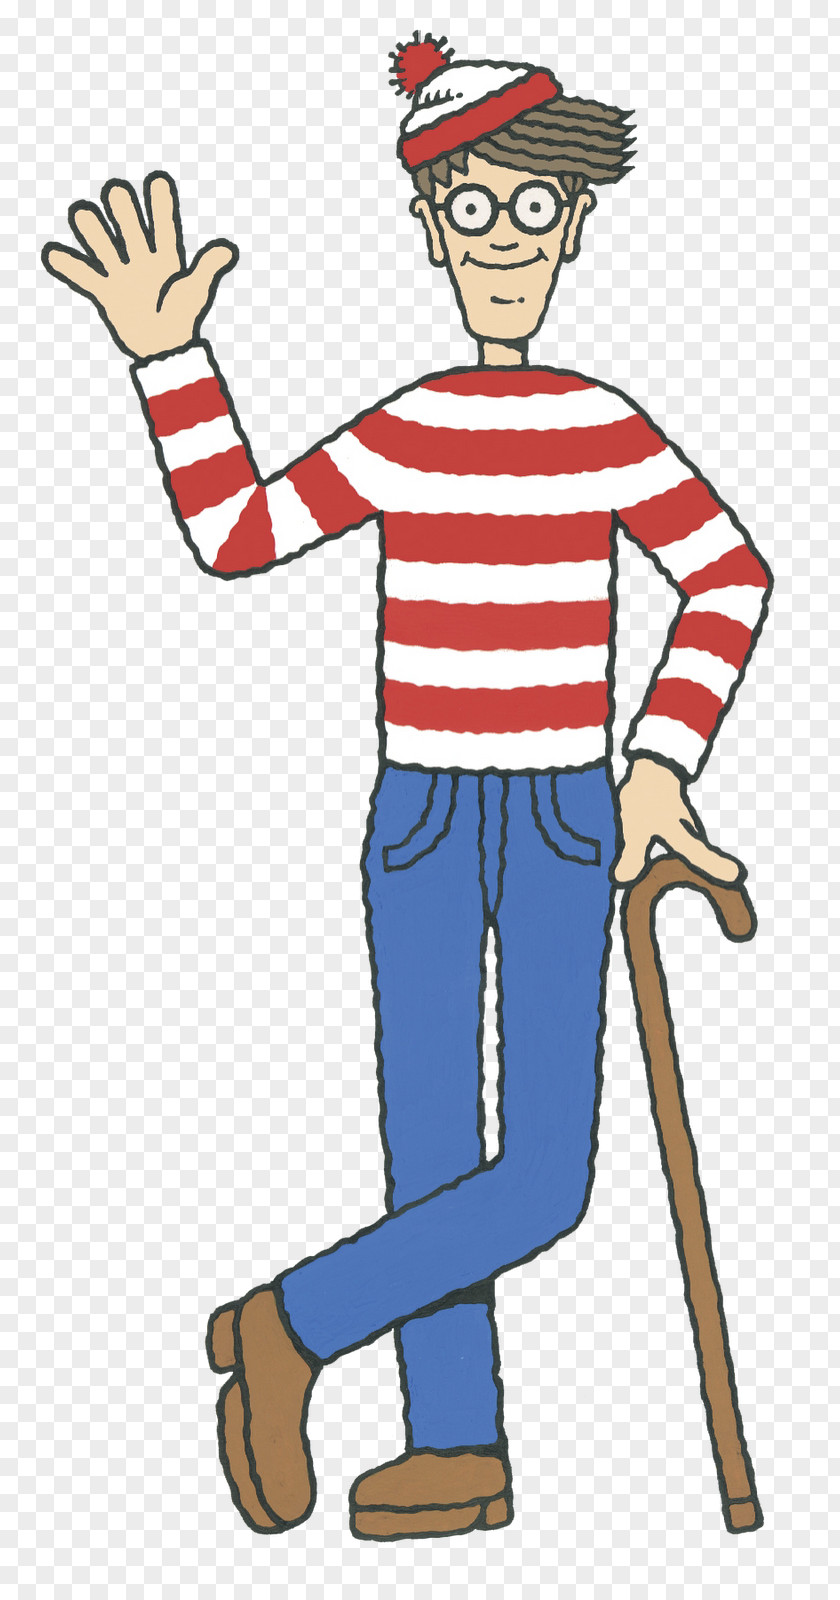 Book Where's Wally? Series Odlaw Children's Literature PNG